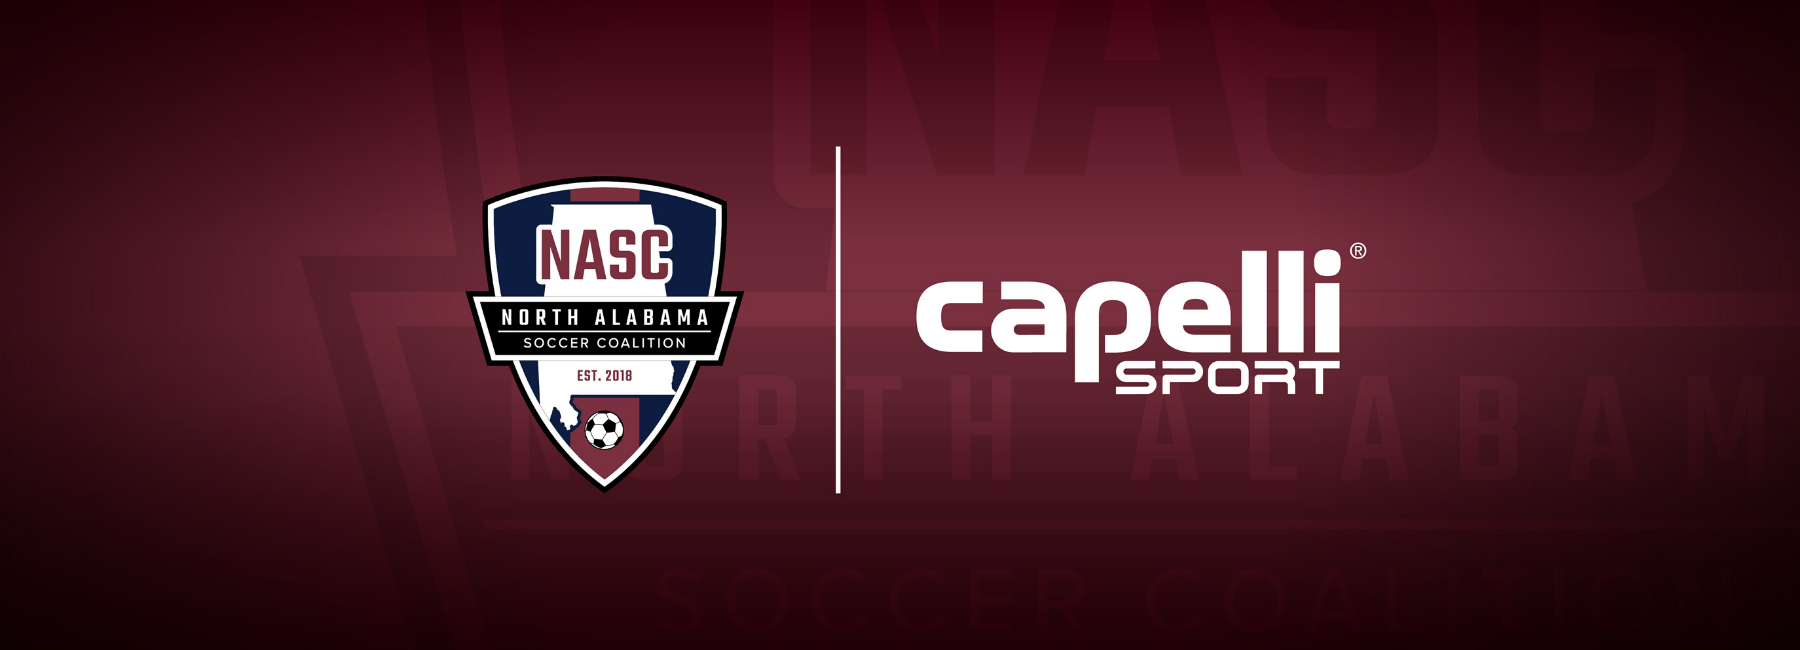 CAPELLI SPORT IS THE OFFICIAL UNIFORM & APPAREL PARTNER FOR NASC